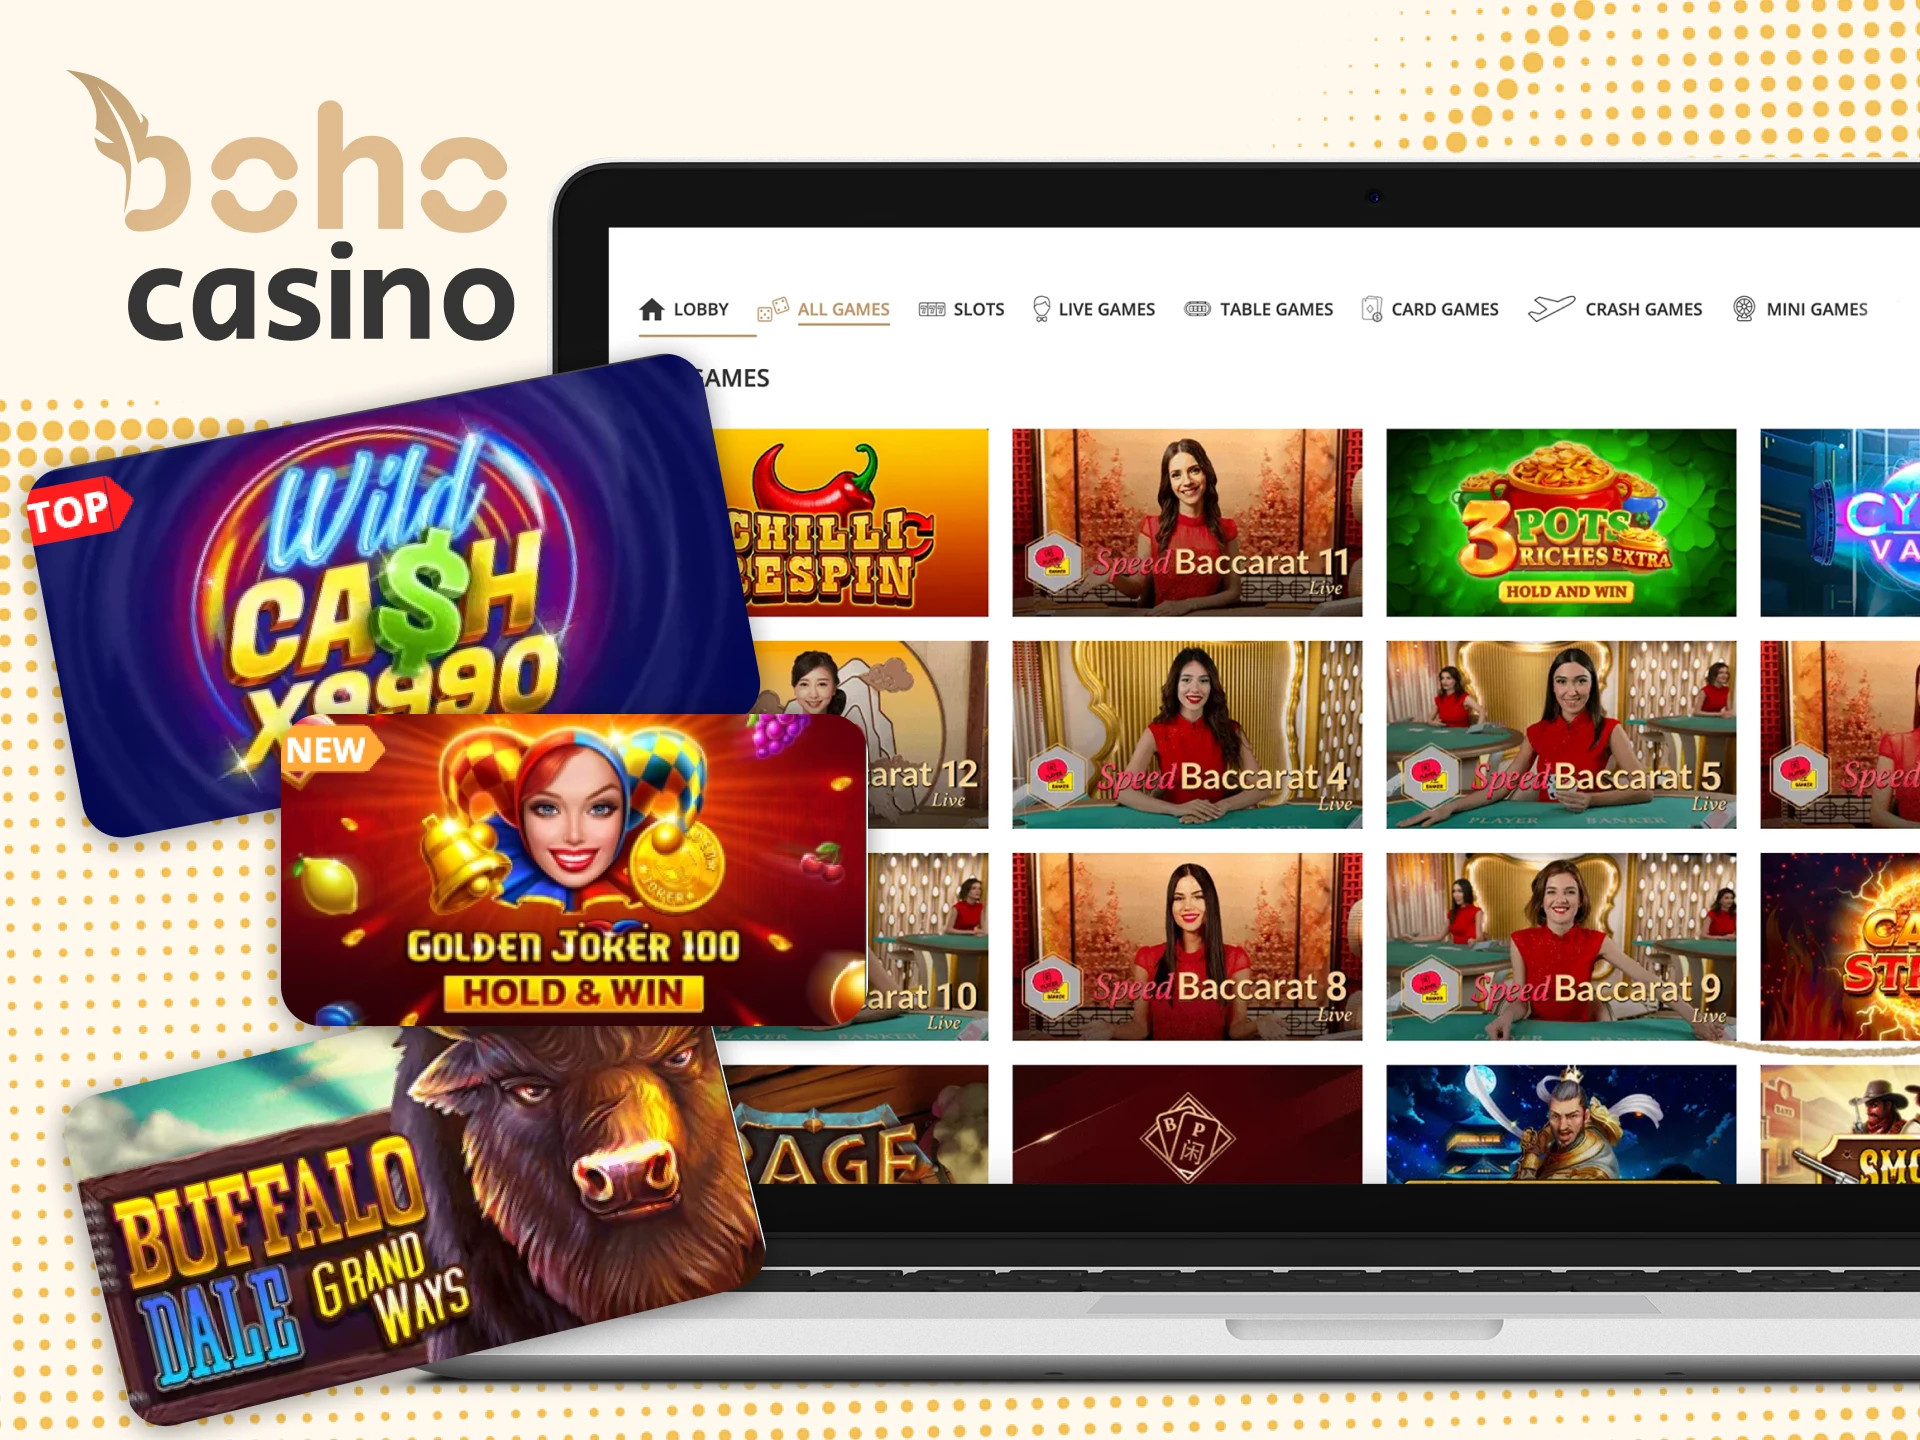 What games can I find at Boho online casino.